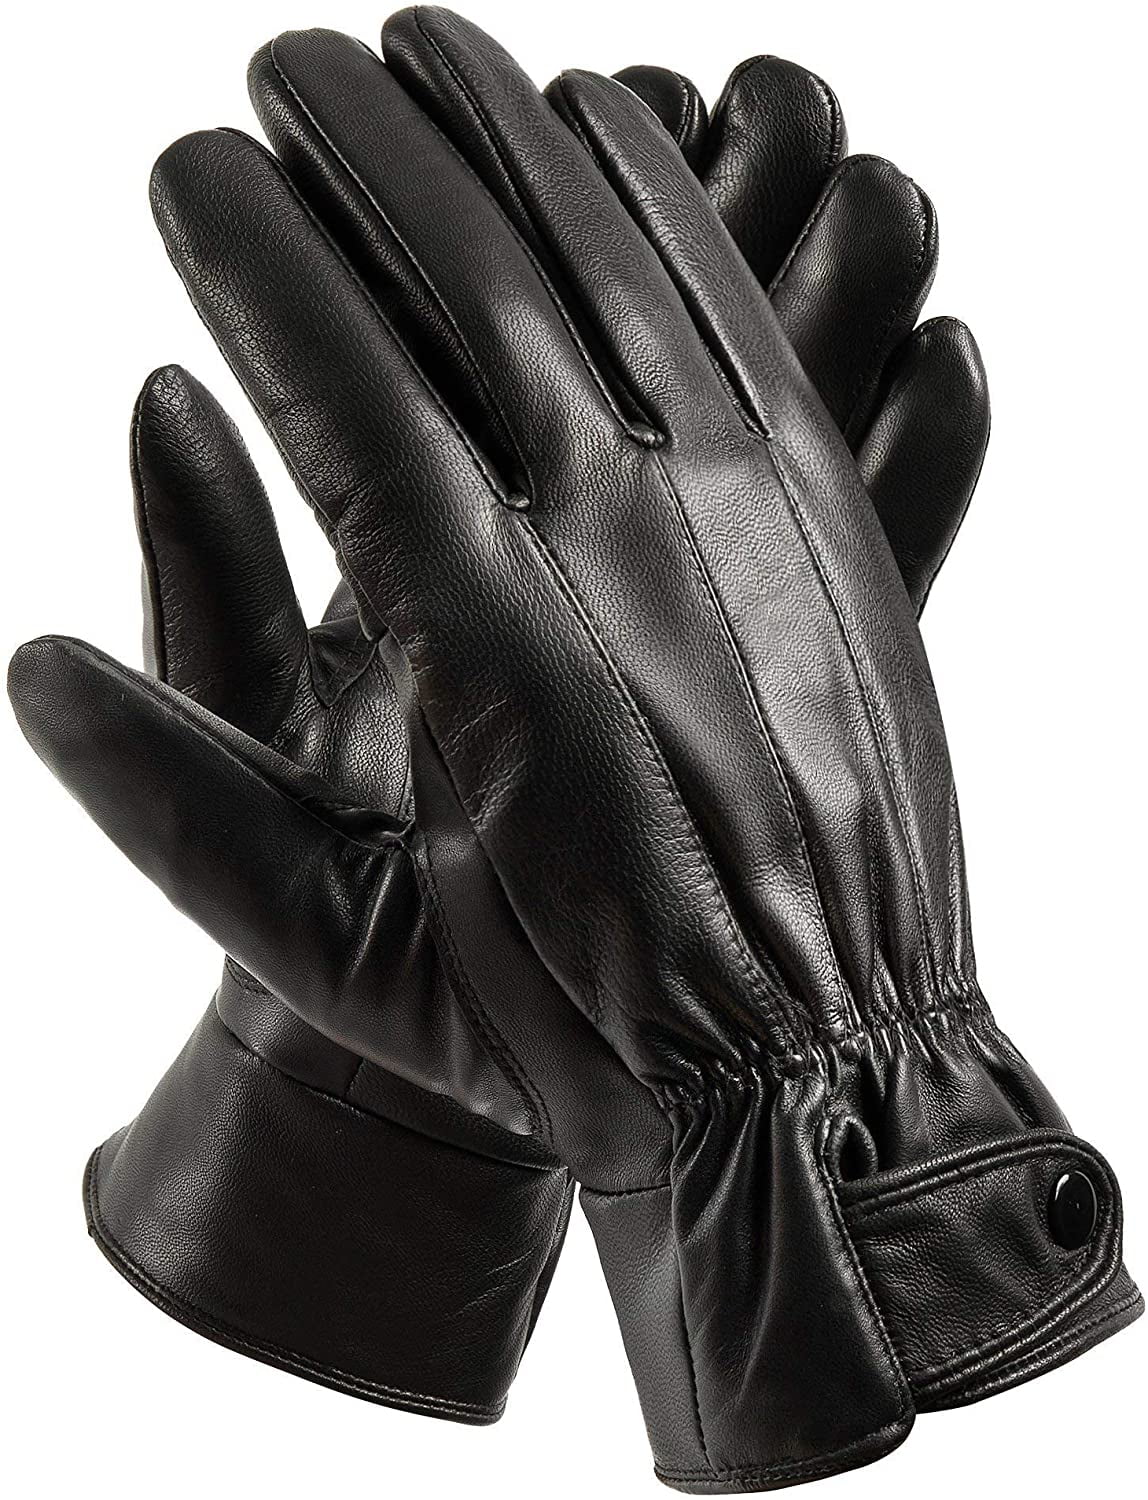 OZERO winter leather gloves for cold resistance in cold weather,1 pair,Black